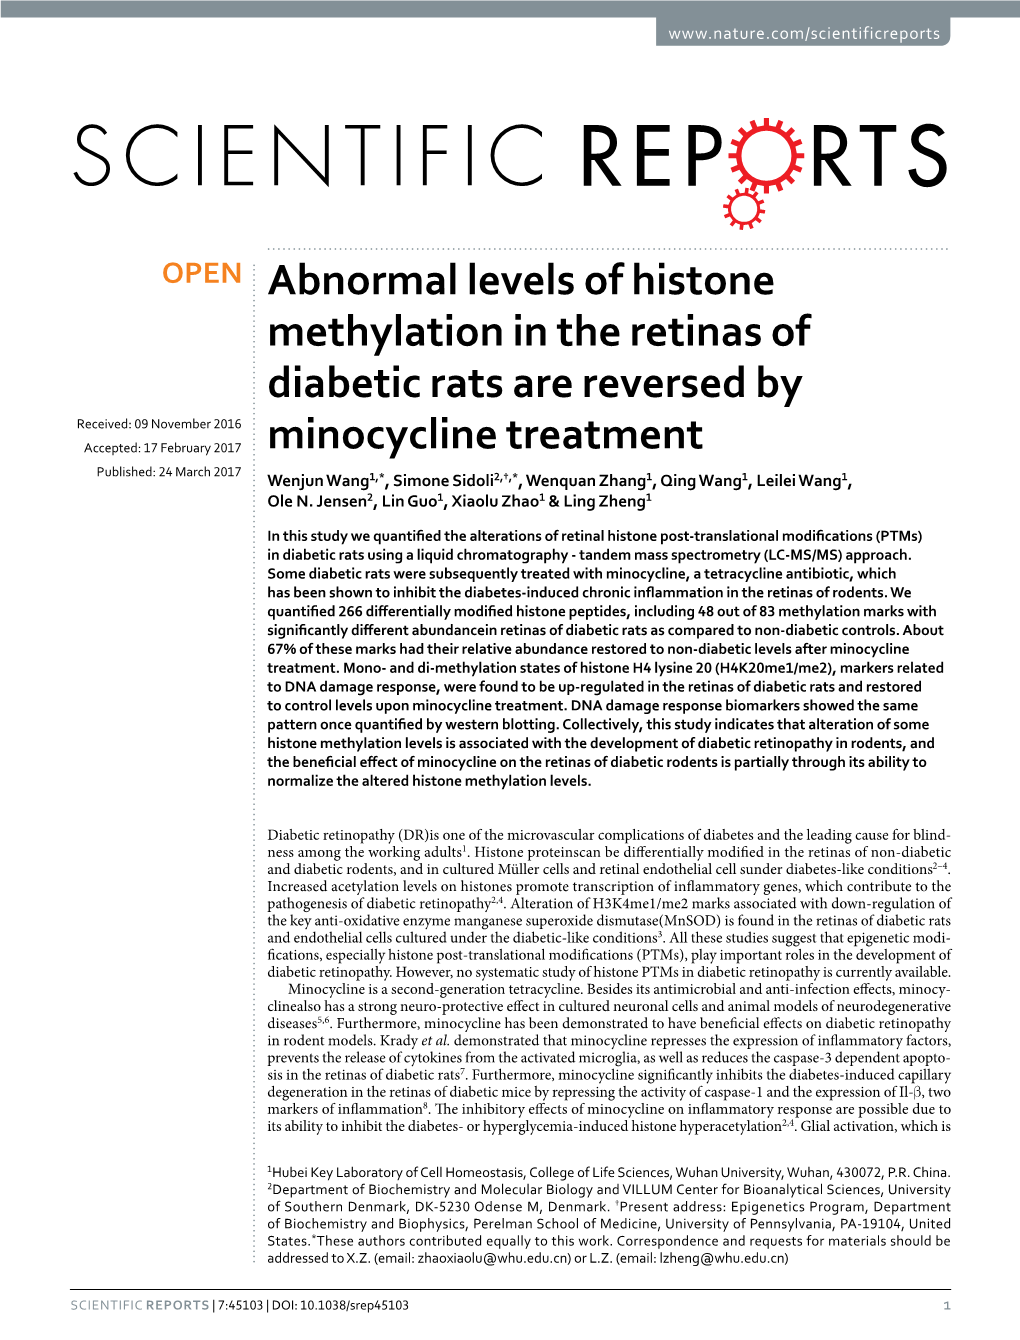 Abnormal Levels of Histone Methylation in the Retinas of Diabetic